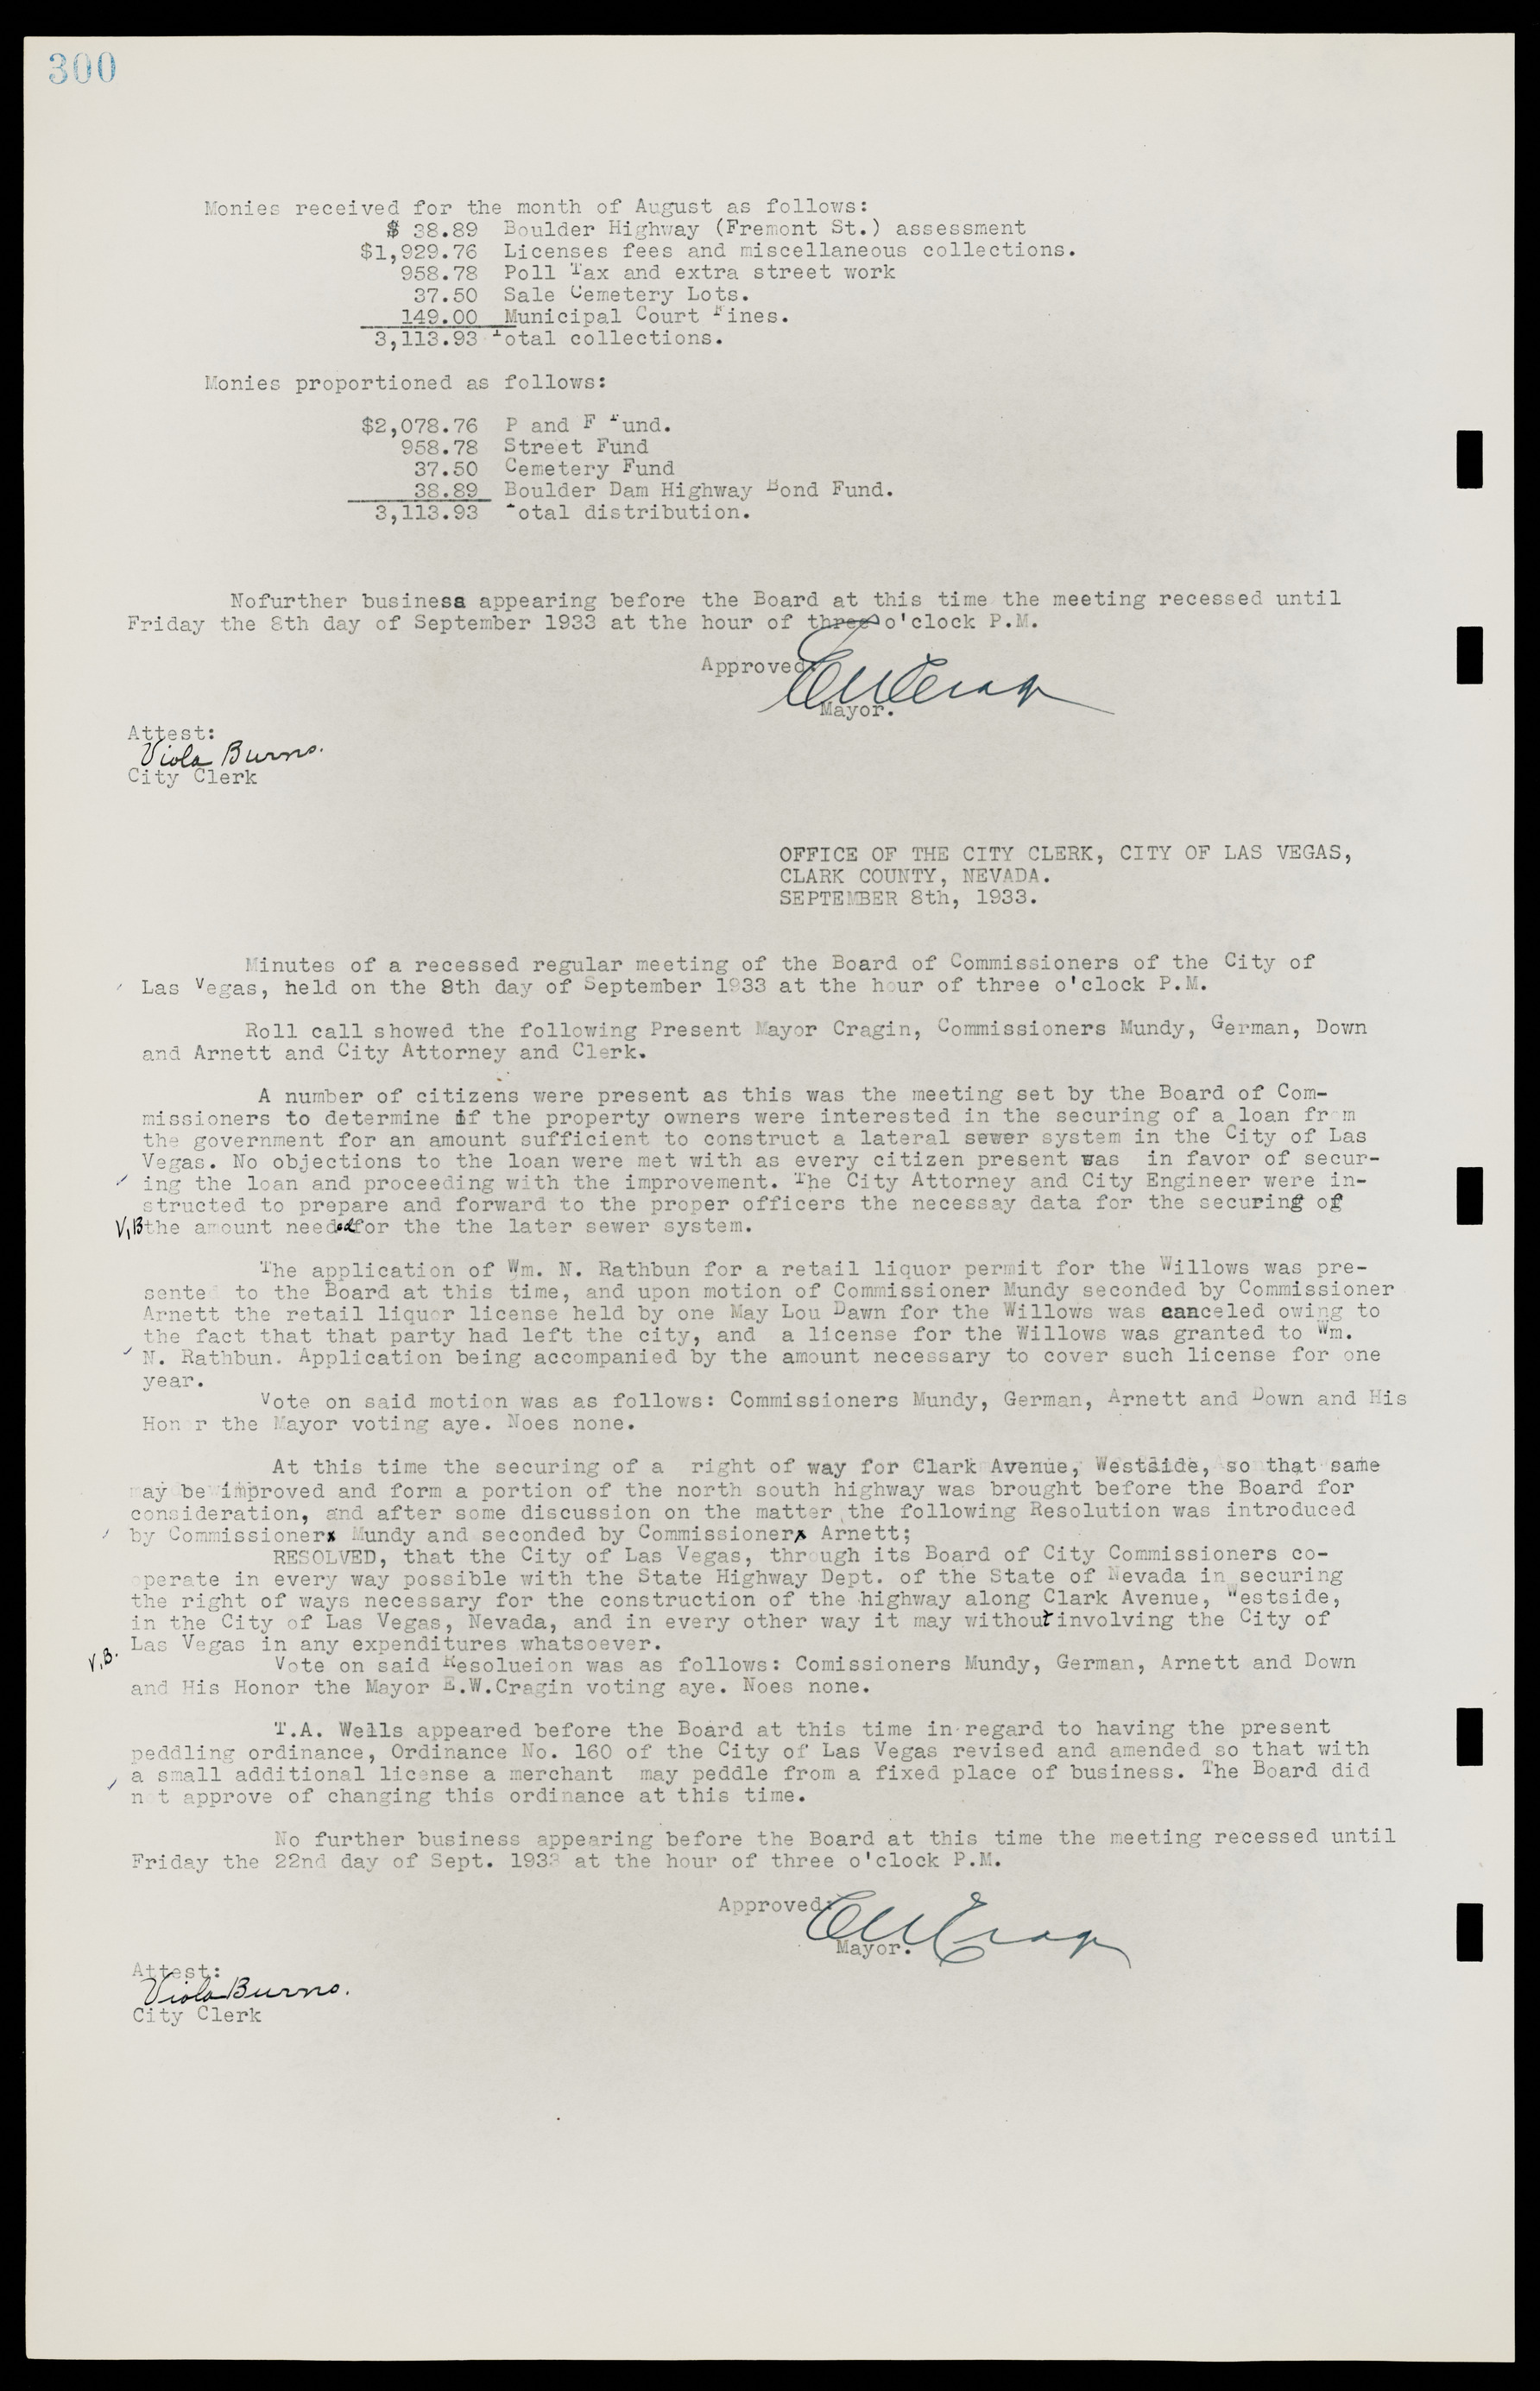 Las Vegas City Commission Minutes, May 14, 1929 to February 11, 1937, lvc000003-307